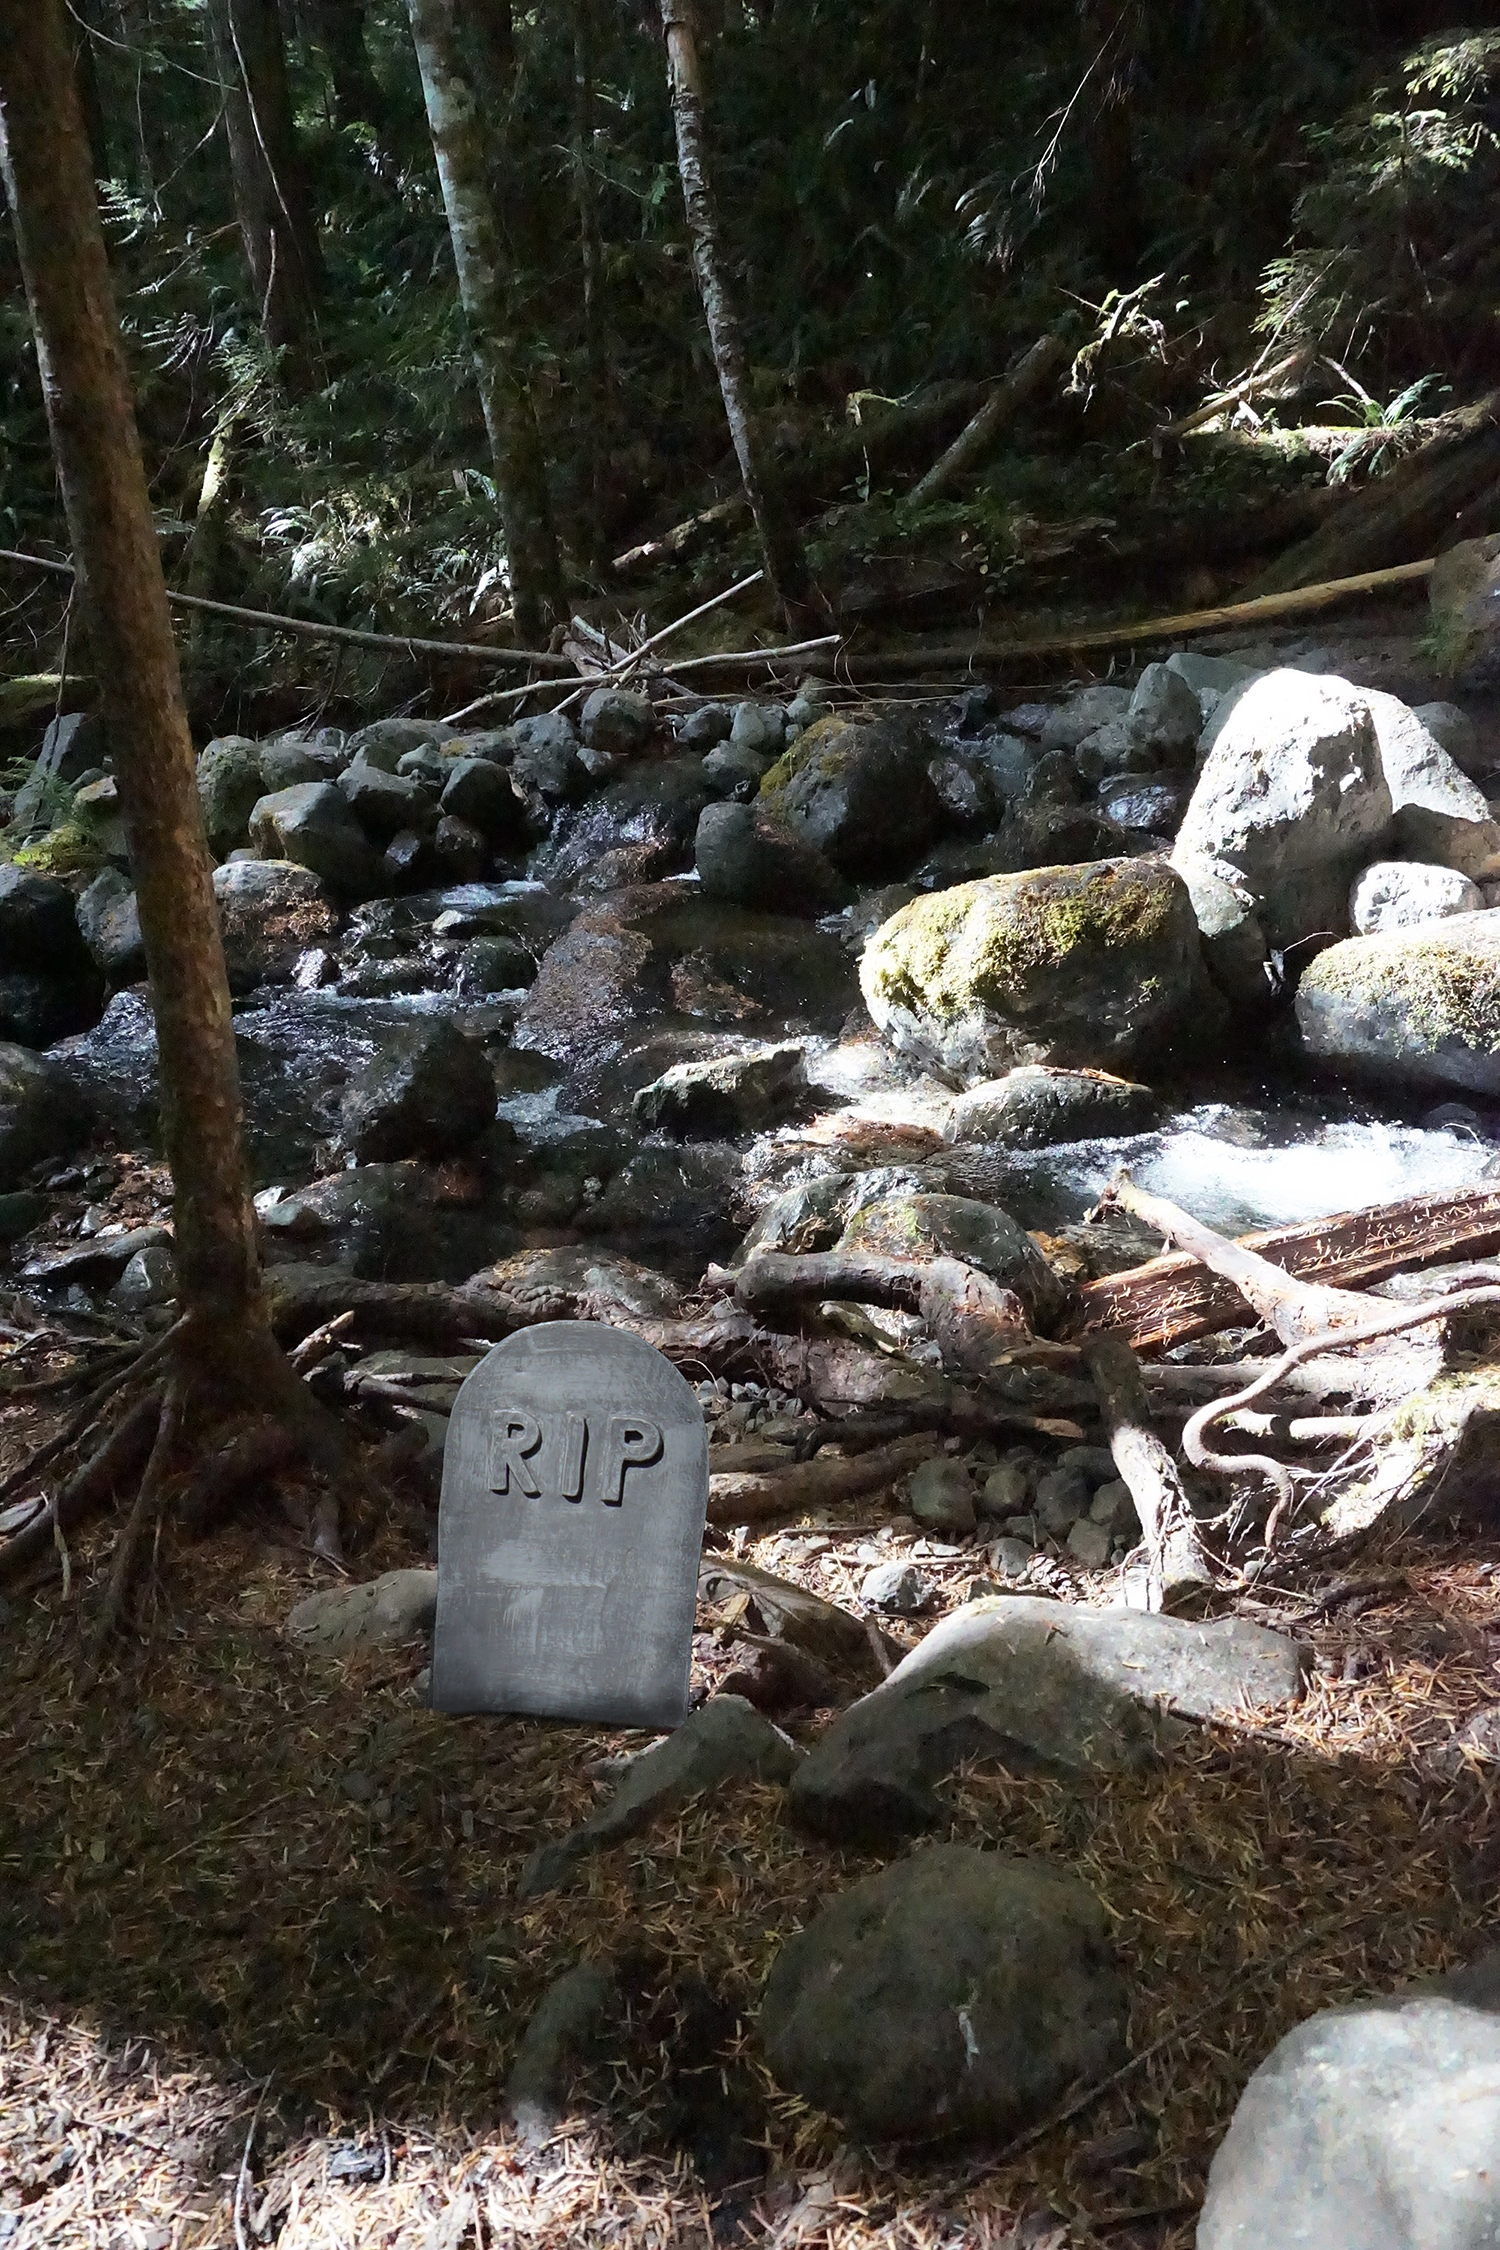 Olympic National Forest 2 - Portable Cemetery (Ongoing)